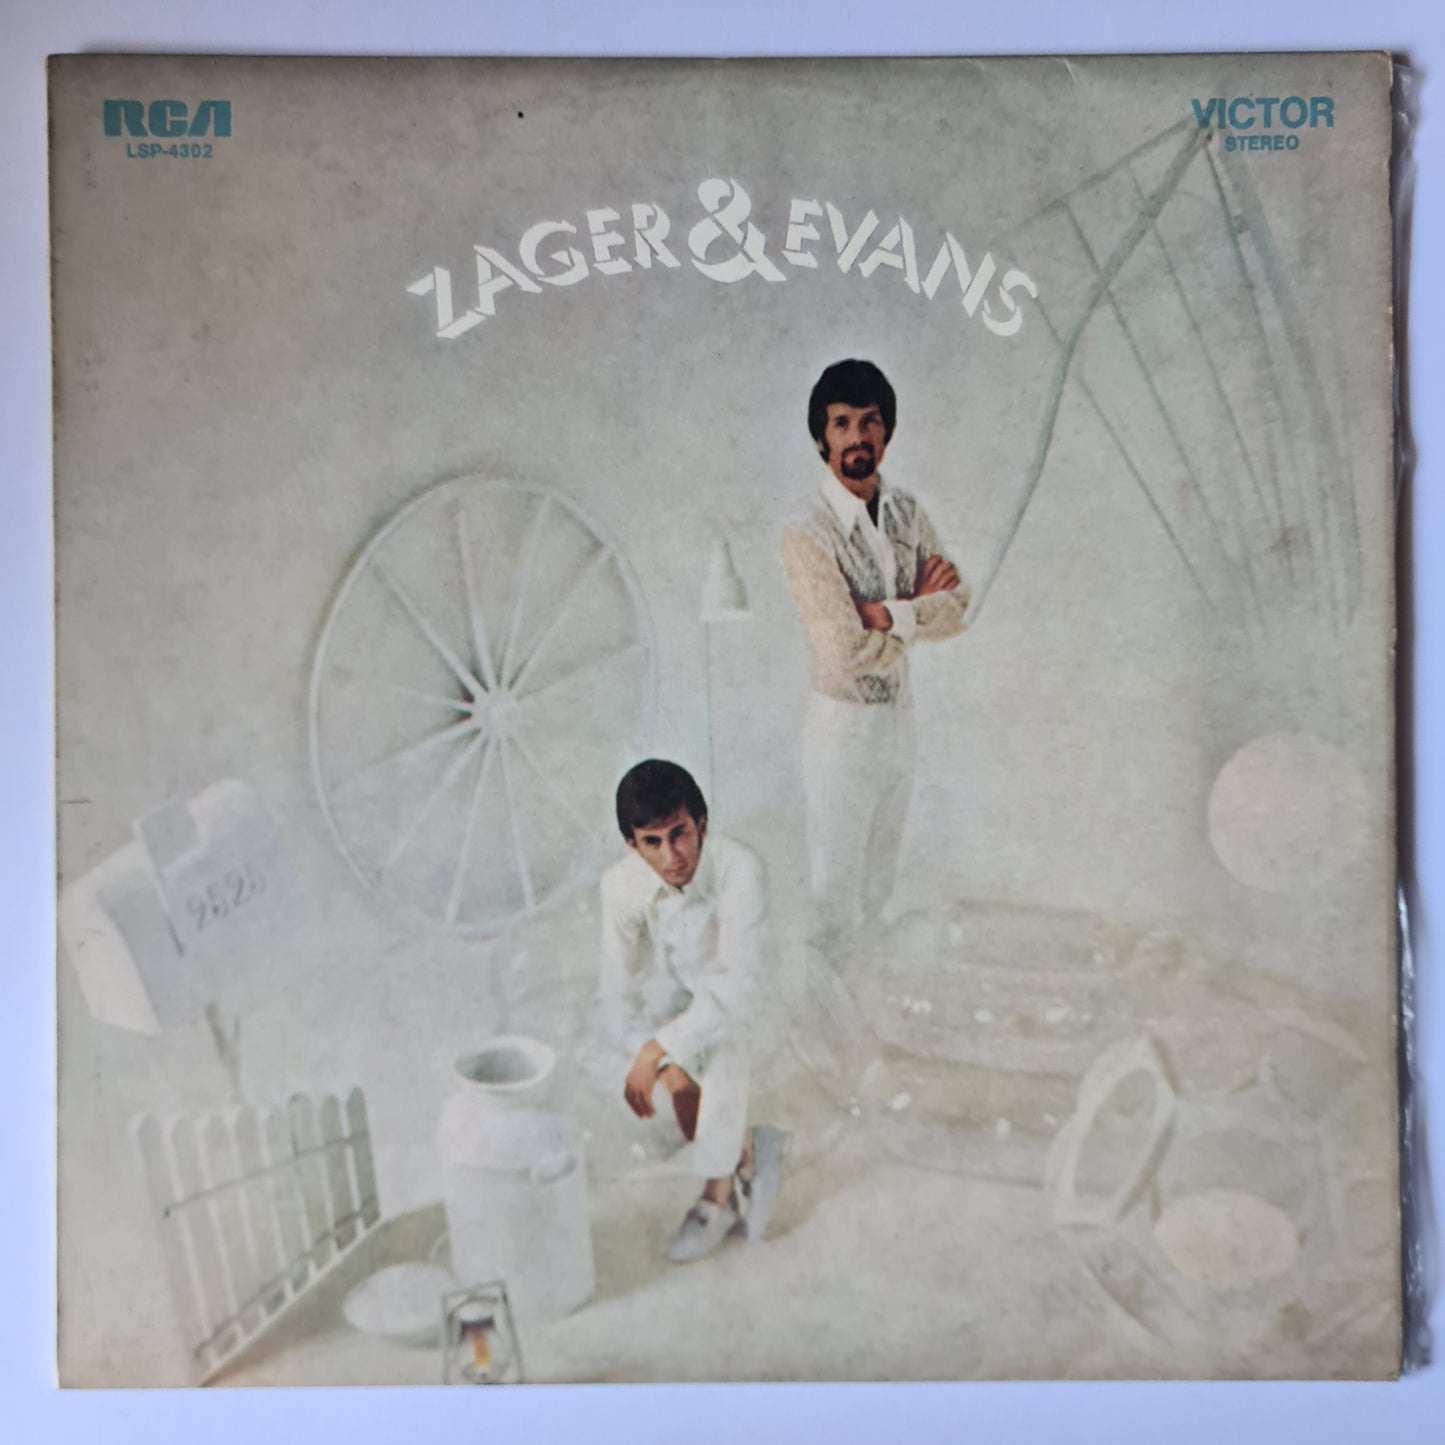 CLEARANCE STOCK! - ZAGER & EVANS - VINYL RECORD